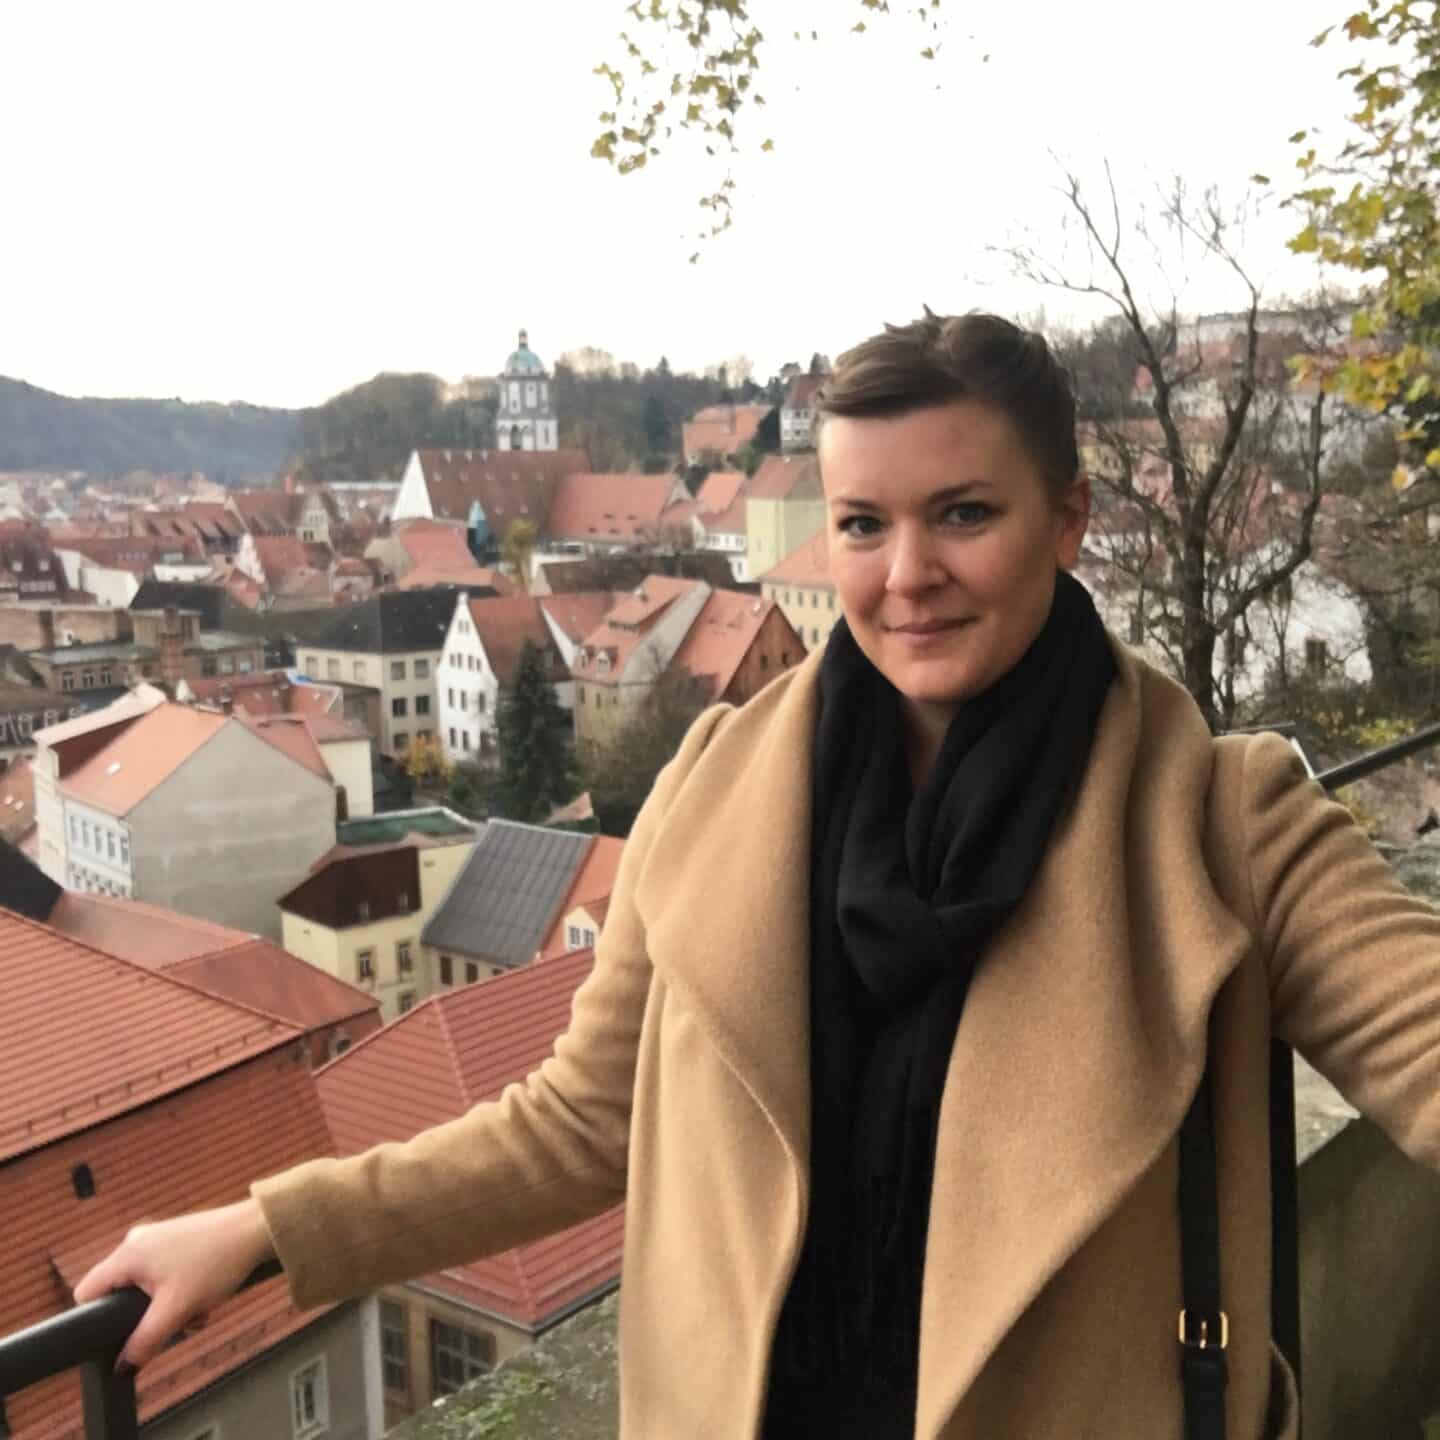 Solo woman traveling in Germany